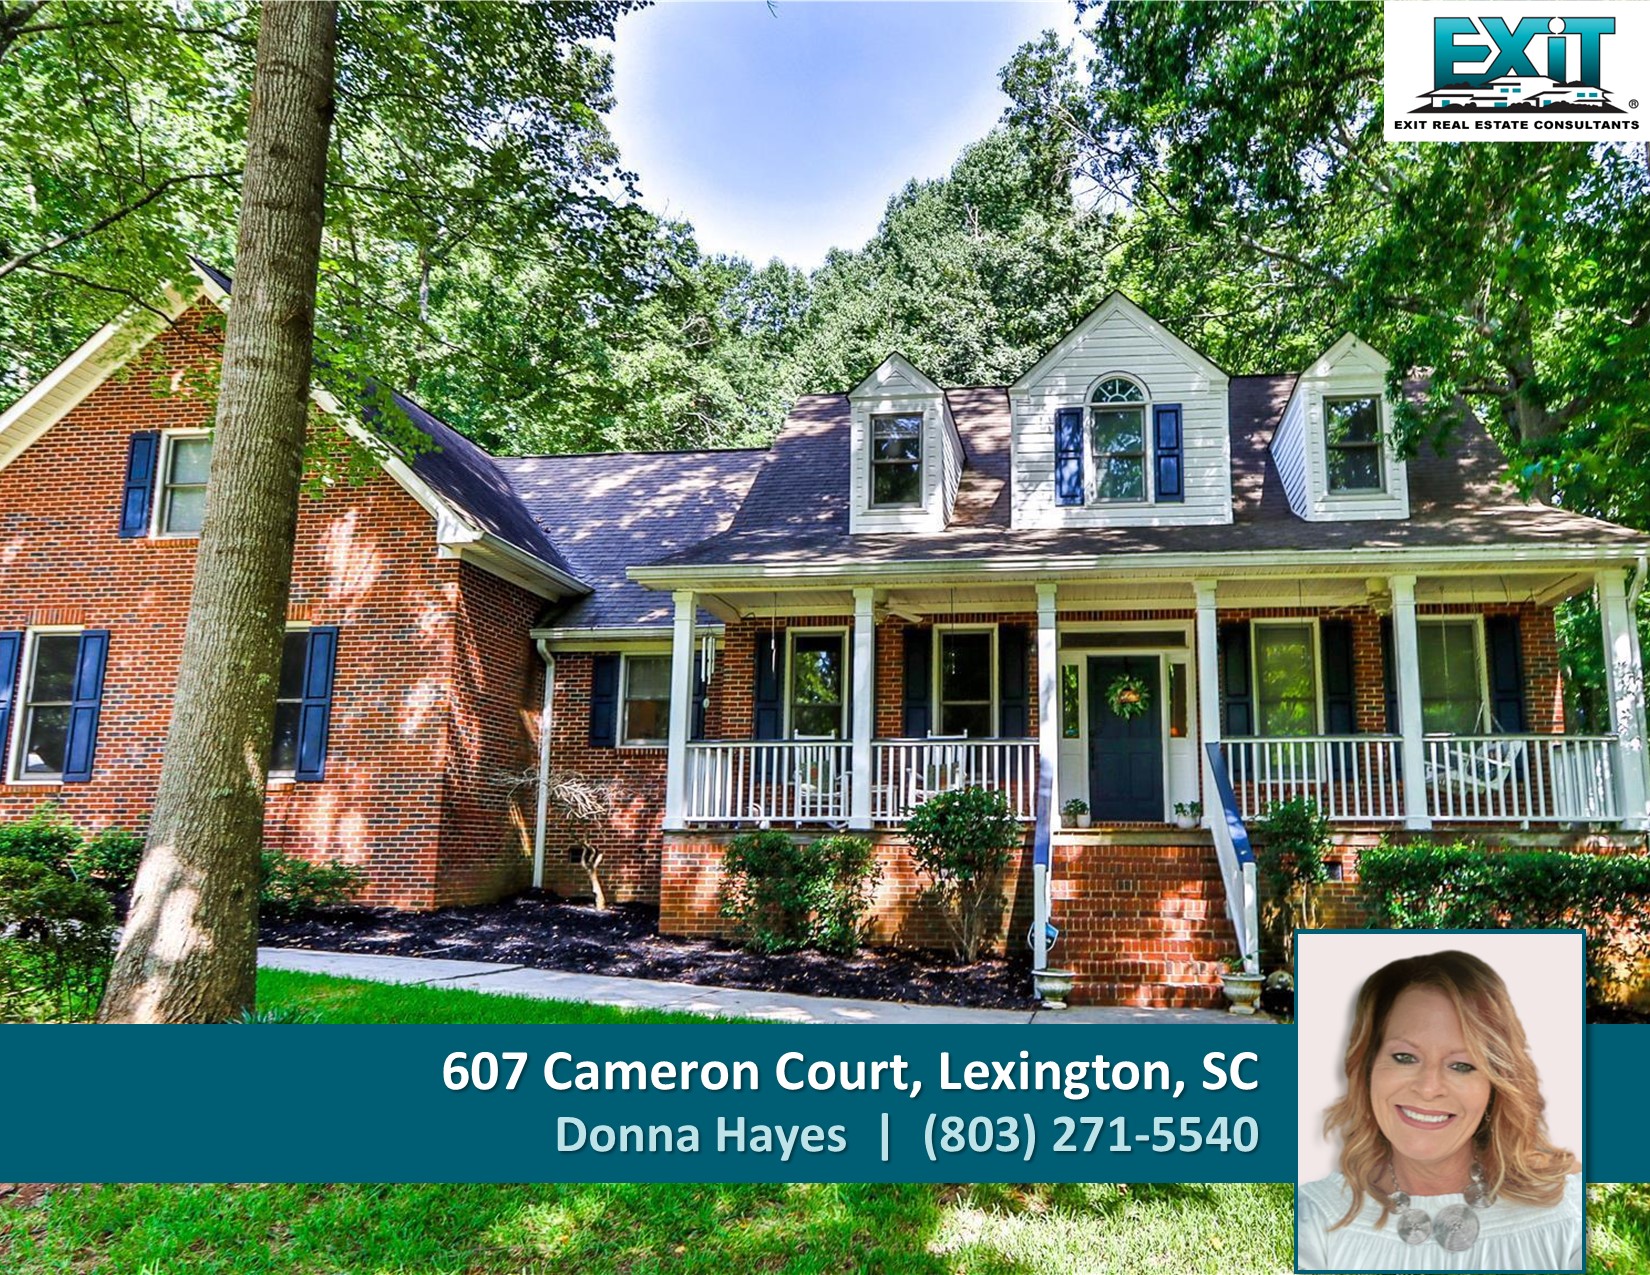 Just listed in Governors Grant - Lexington